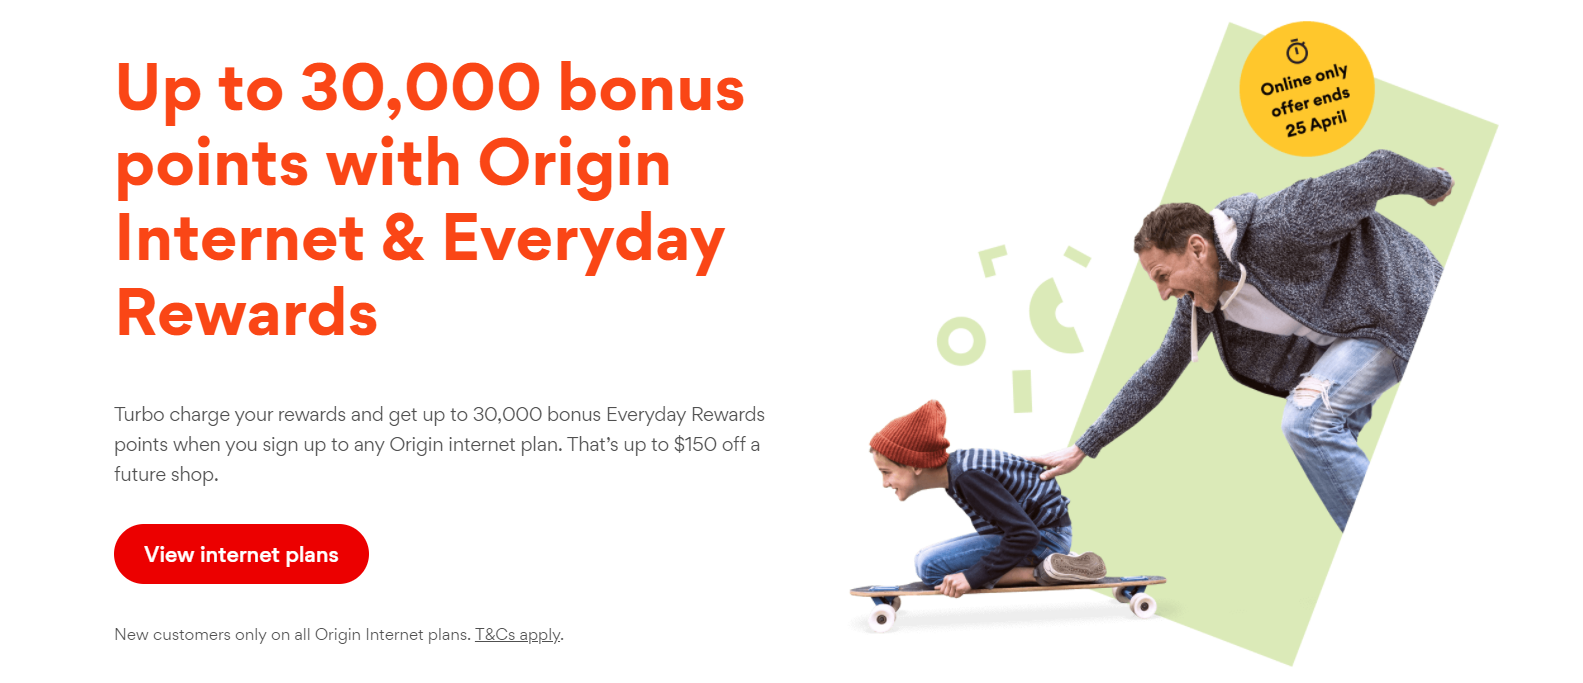 Get up to 30,000 bonus Everyday Rewards points when you sign up to any Origin internet plan.